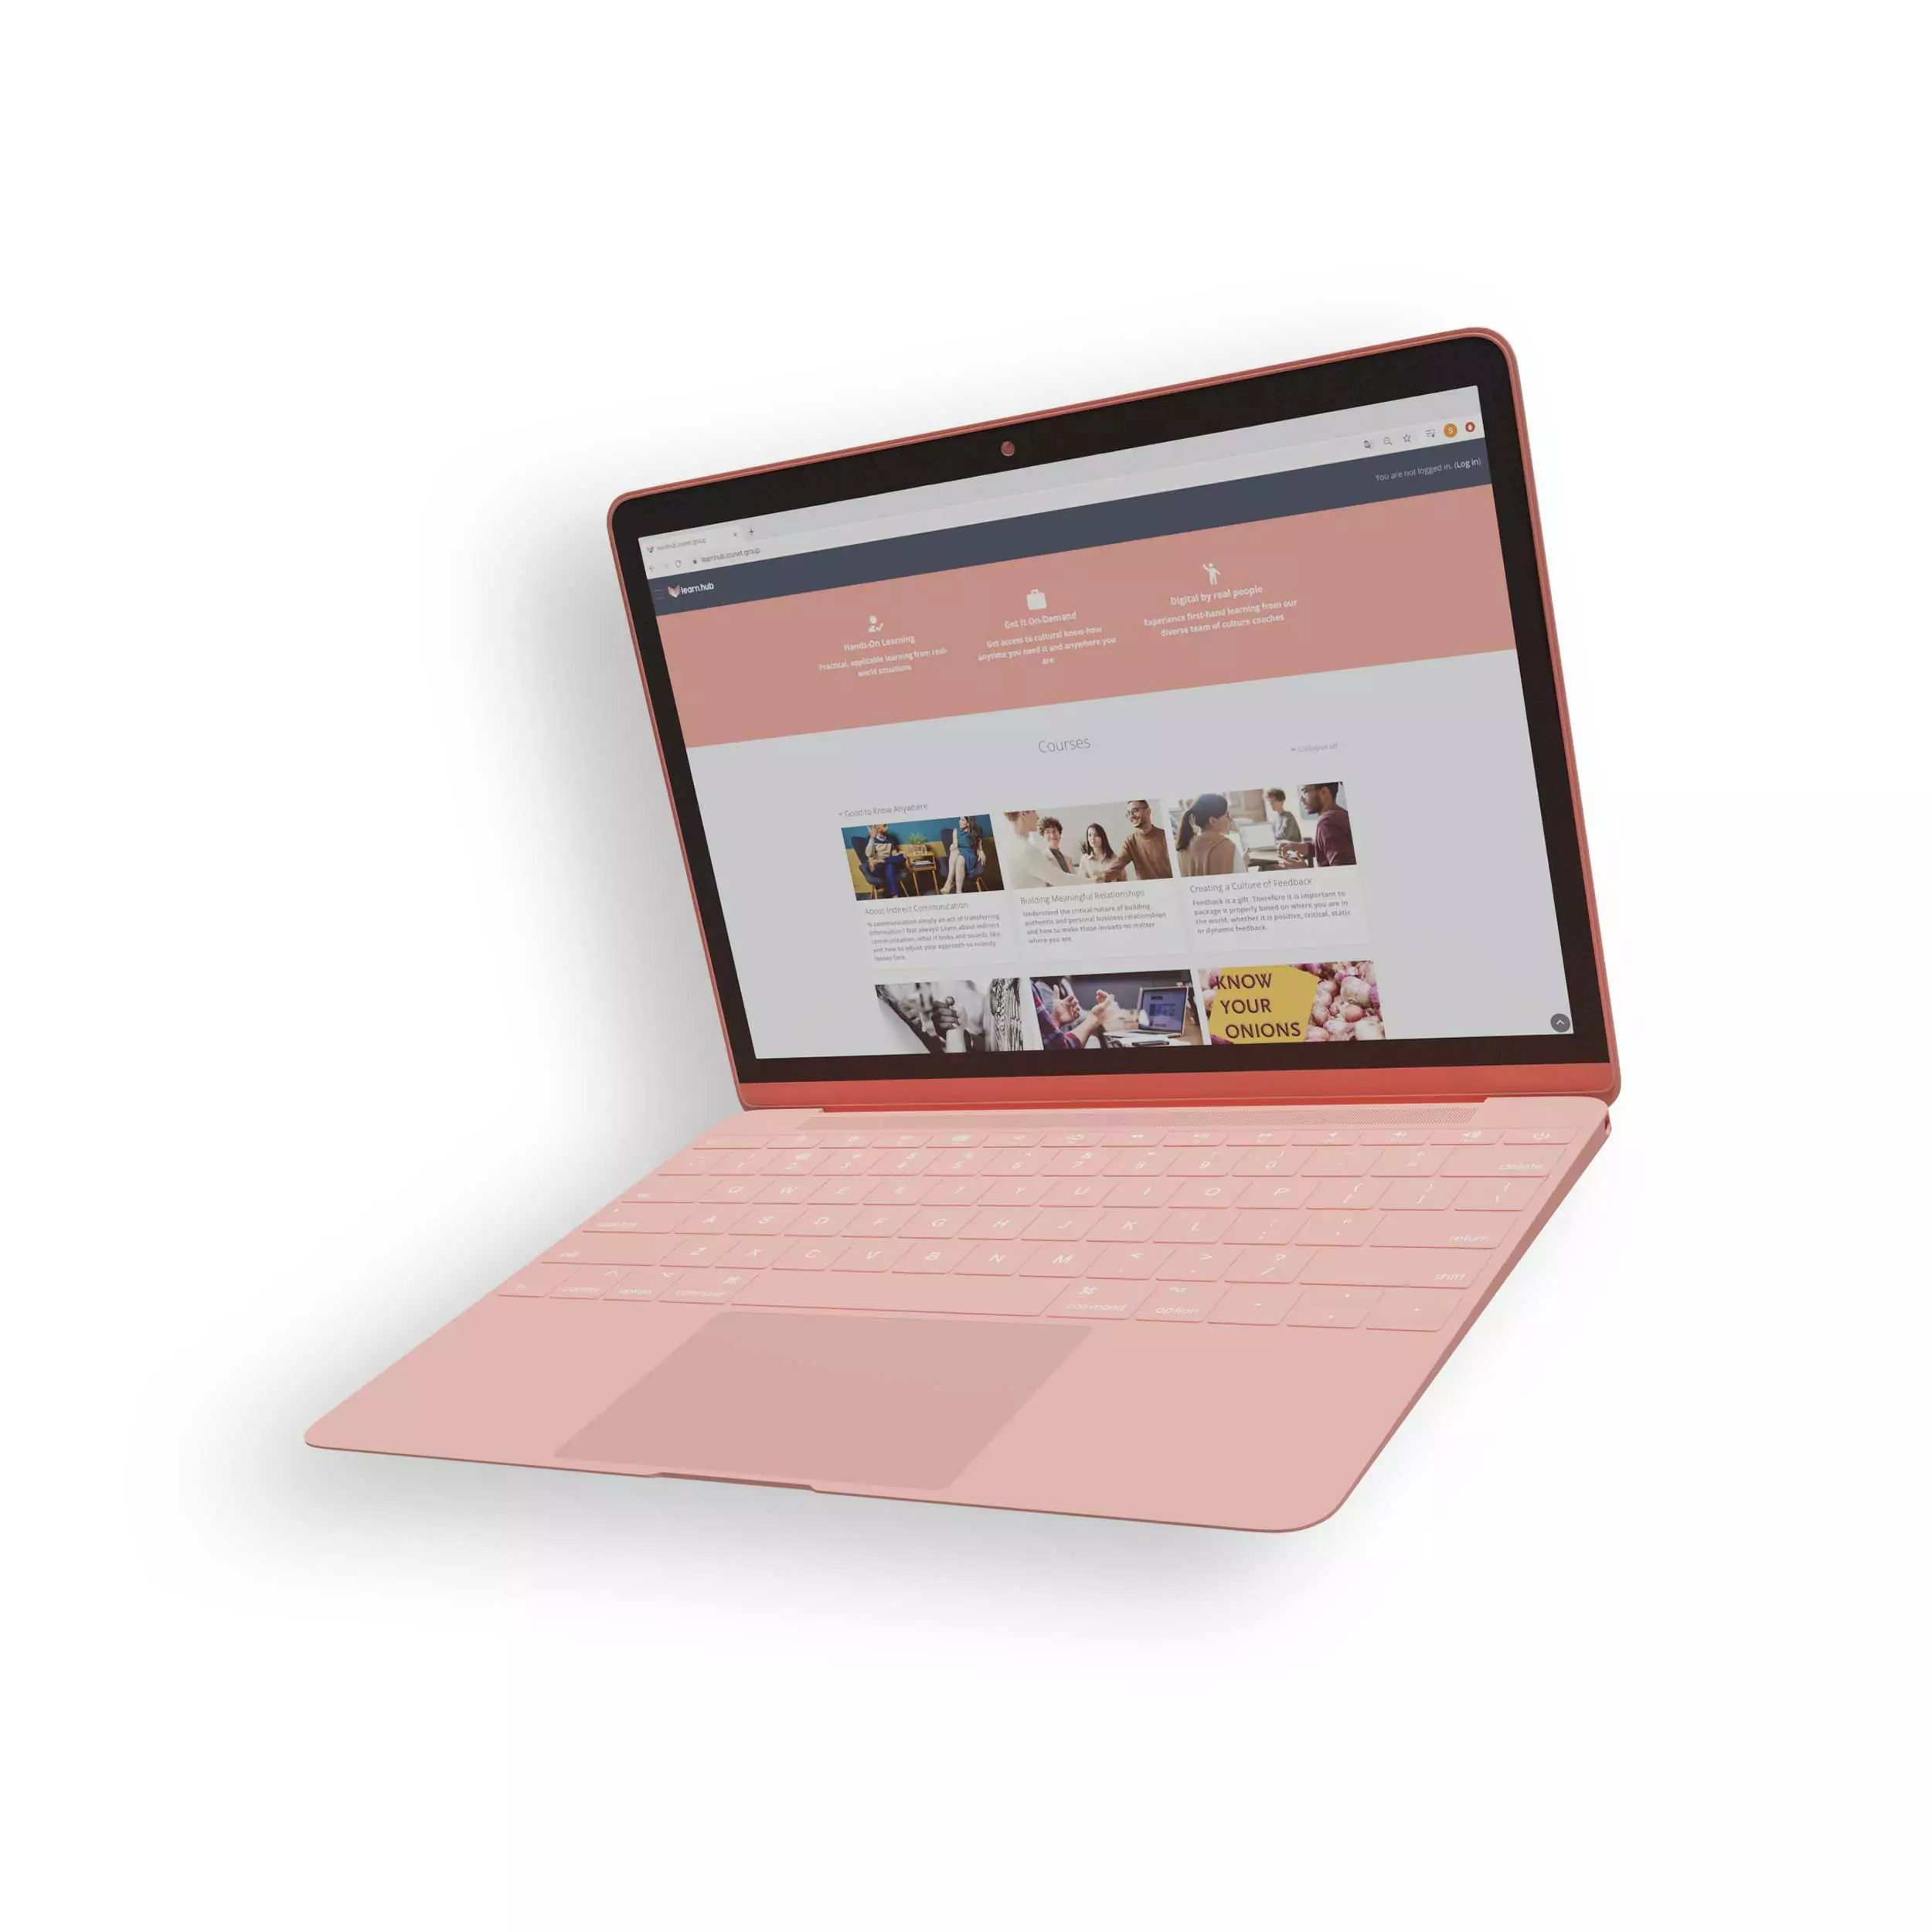 ICUnet Laptop with Global Mobility Website